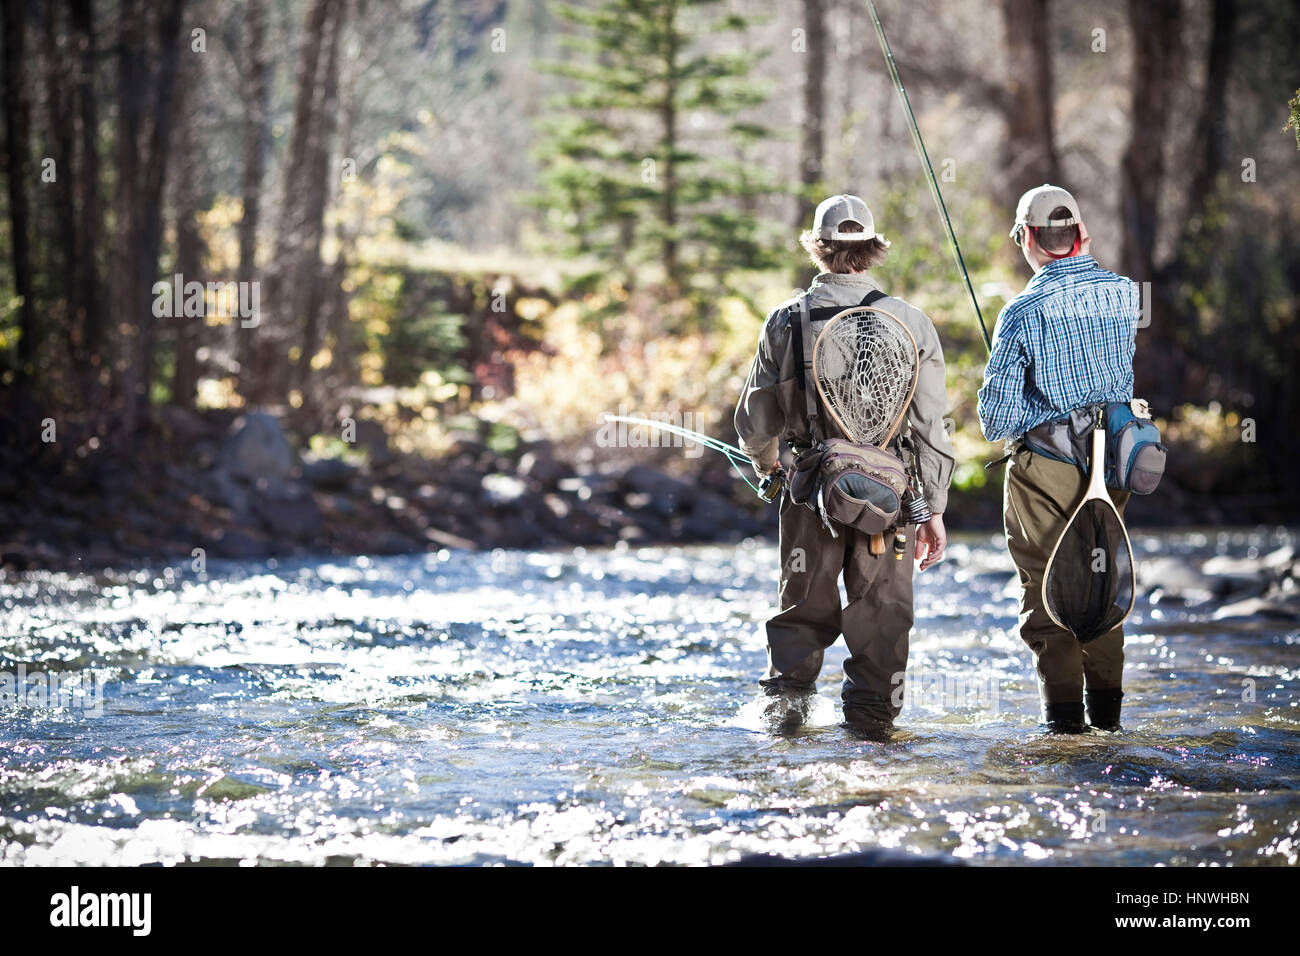 Fishermen ankle deep in river fly fishing, Colorado, USA Stock Photo